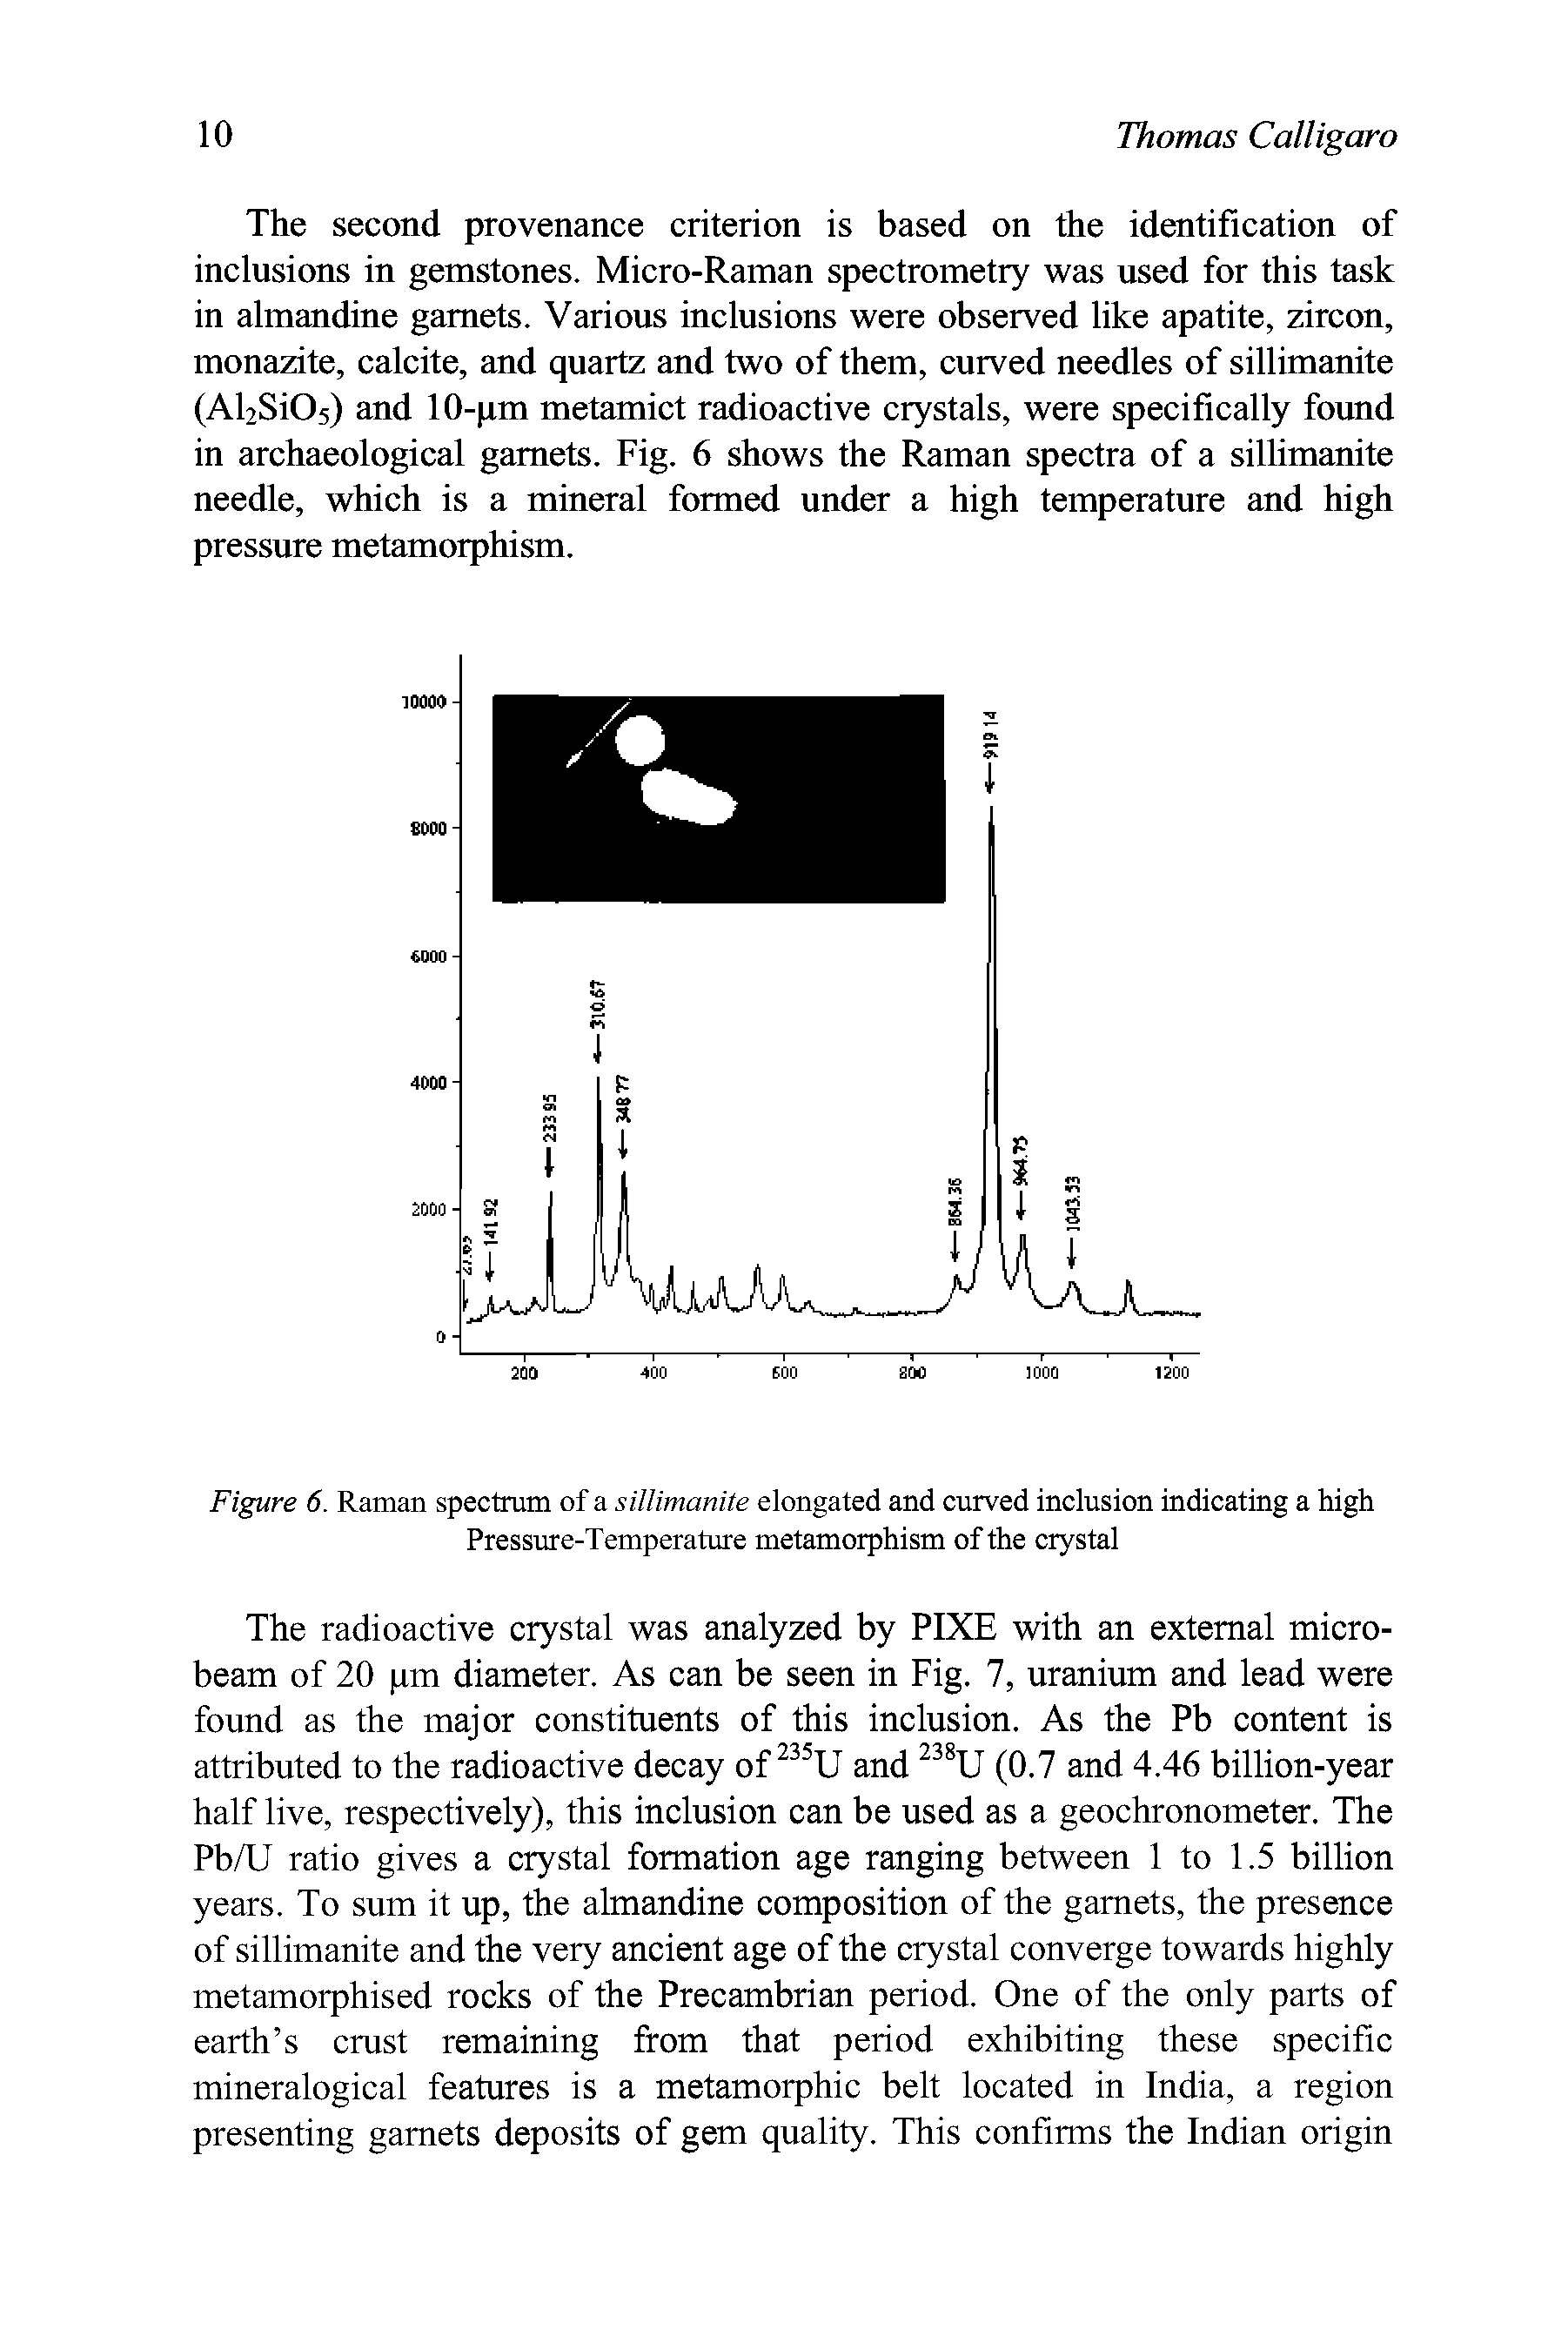 Figure 6. Raman spectrum of a sillimanite elongated and curved inclusion indicating a high Pressure-Temperature metamorphism of the crystal...